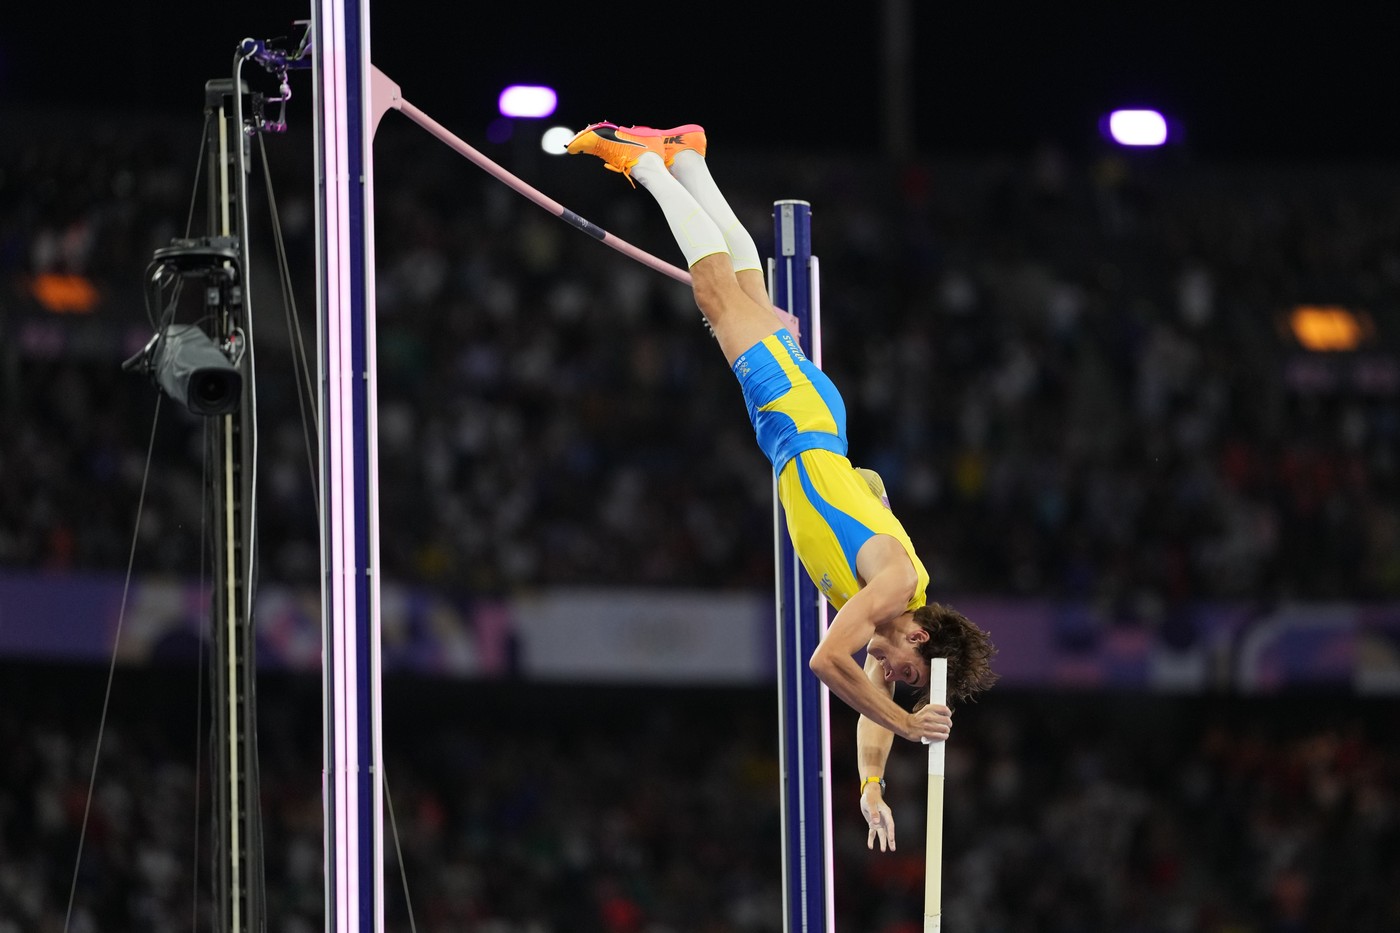 Armand Duplantis of Sweden wins gold and sets a new World Record in the Men's Pole Vault
Paris 2024 Olympic Games, Day Ten, Paris, France - 05 Aug 2024,Image: 896314450, License: Rights-managed, Restrictions: , Model Release: no